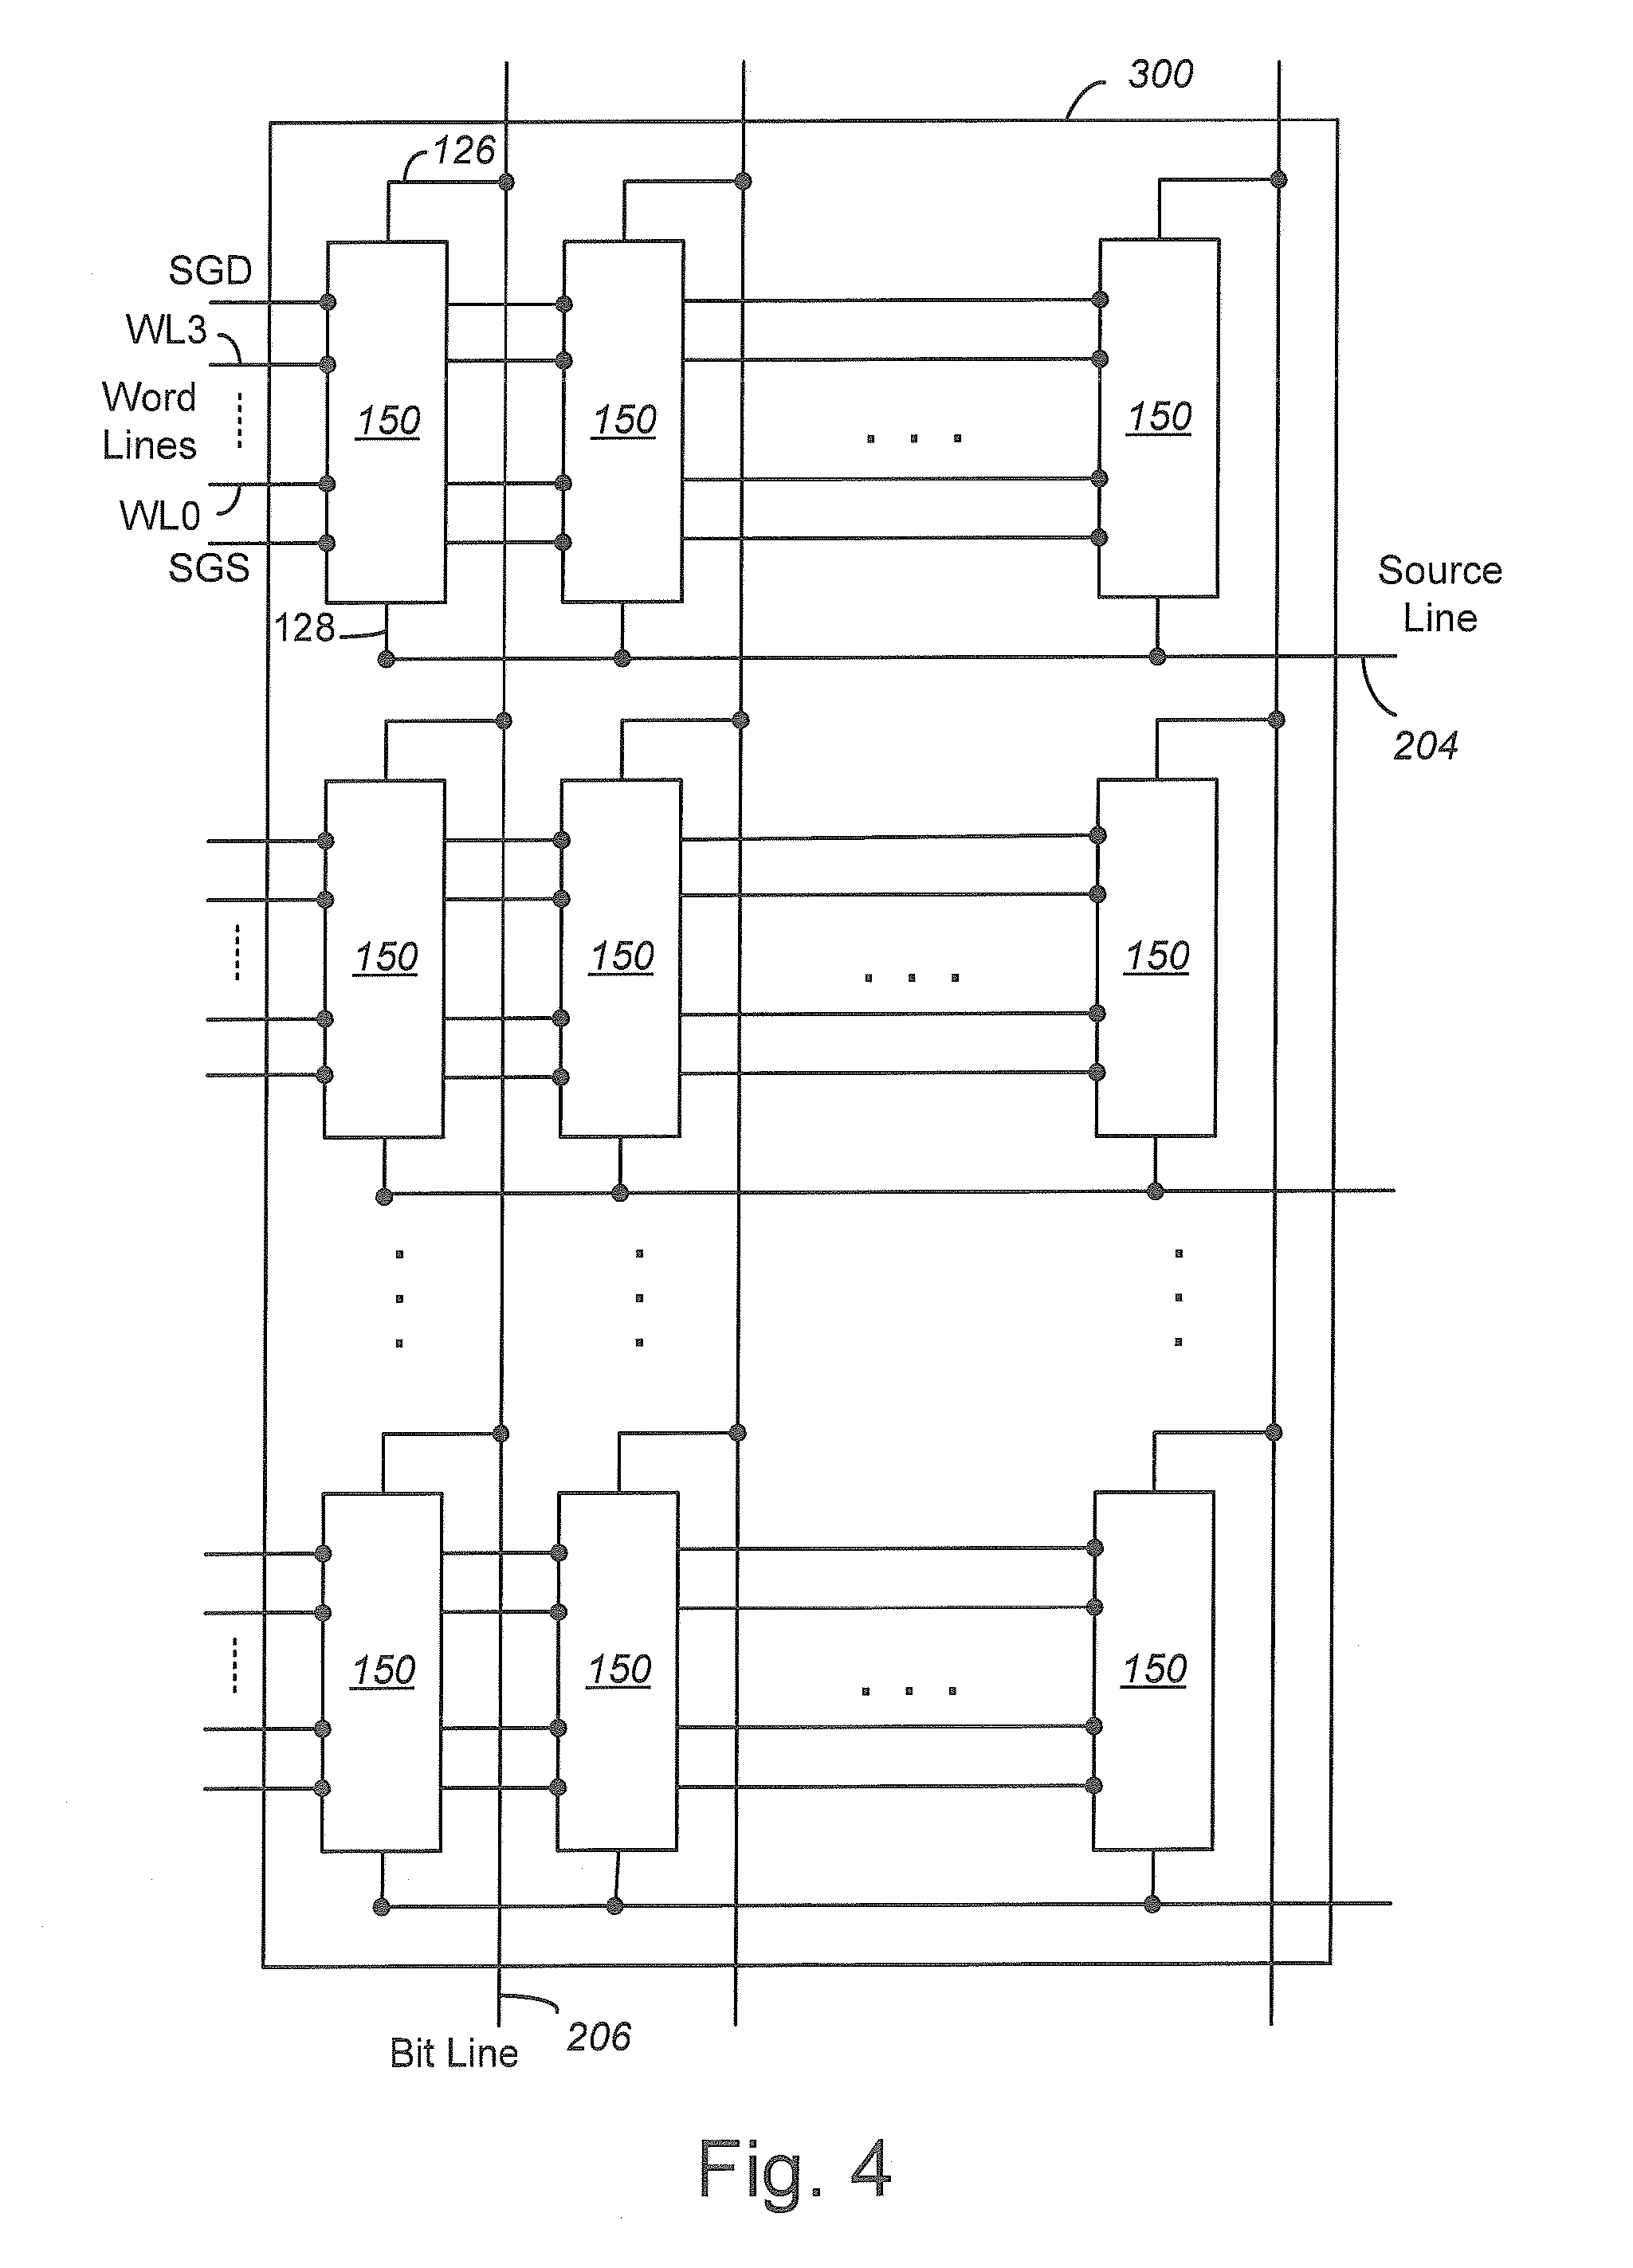 System that compensates for coupling based on sensing a neighbor using coupling